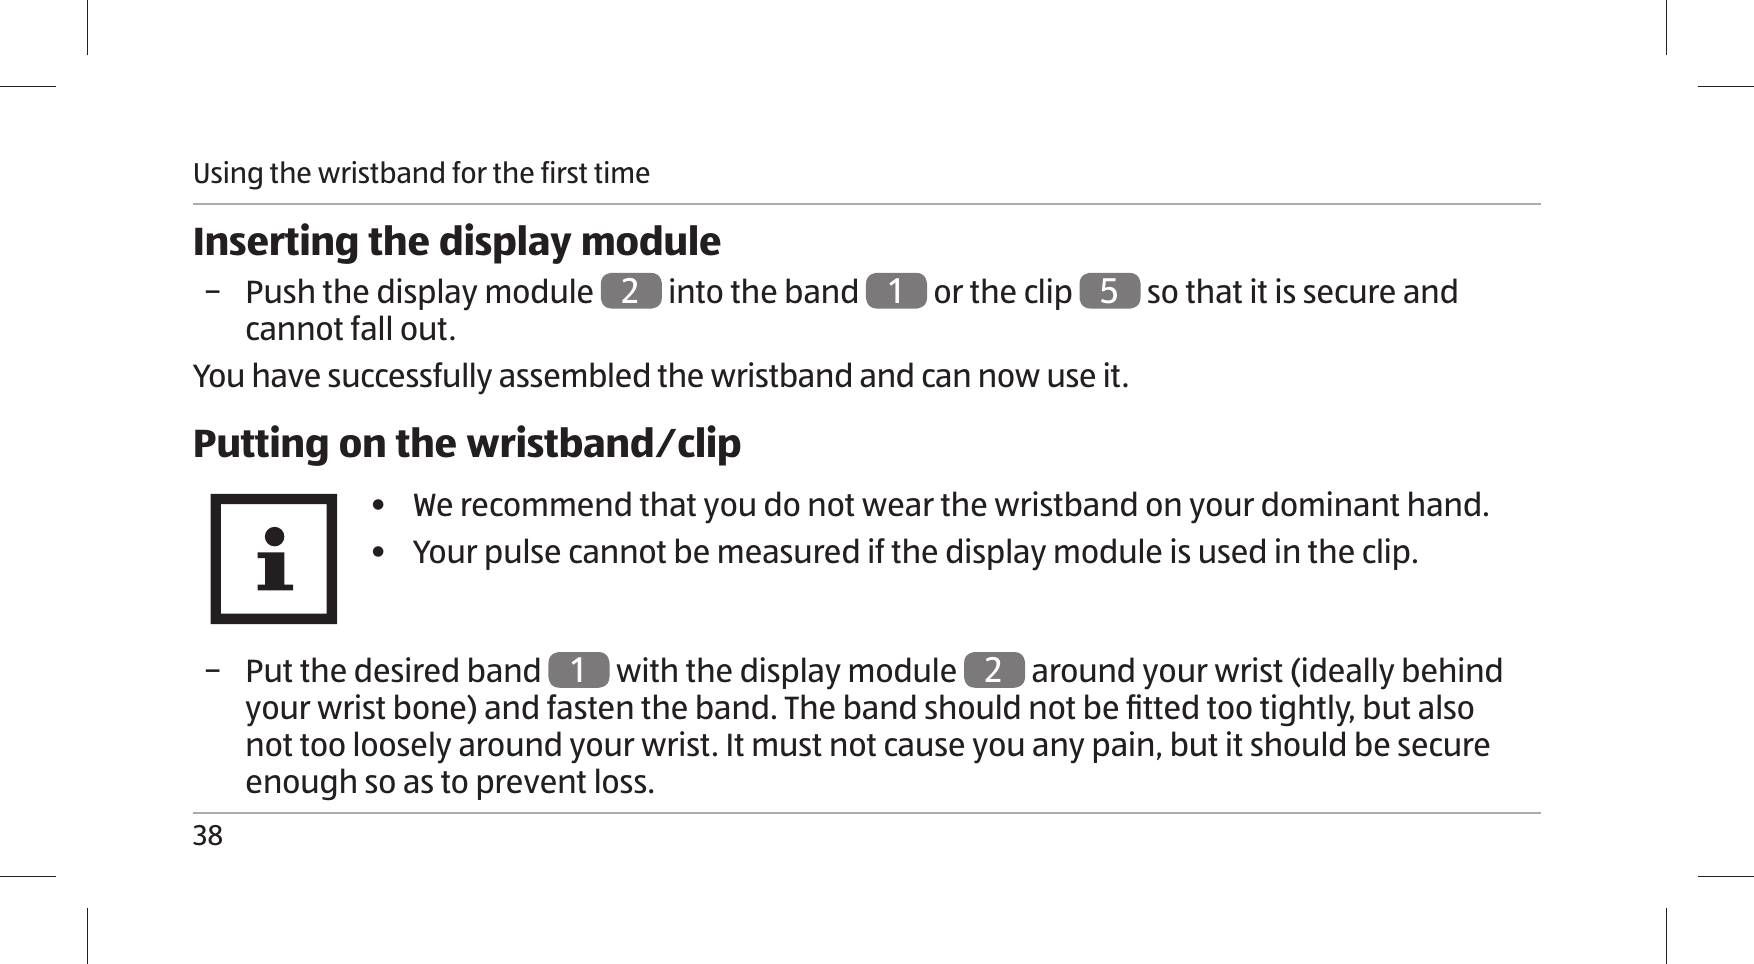 Using the wristband for the first time38Inserting the display module − Push the display module 2 into the band 1 or the clip  5 so that it is secure and cannot fall out. You have successfully assembled the wristband and can now use it.Putting on the wristband⁄clip•  We recommend that you do not wear the wristband on your dominant hand.•  Your pulse cannot be measured if the display module is used in the clip. − Put the desired band 1 with the display module 2 around your wrist (ideally behind your wrist bone) and fasten the band. The band should not be ﬁ tted too tightly, but also not too loosely around your wrist. It must not cause you any pain, but it should be secure enough so as to prevent loss.